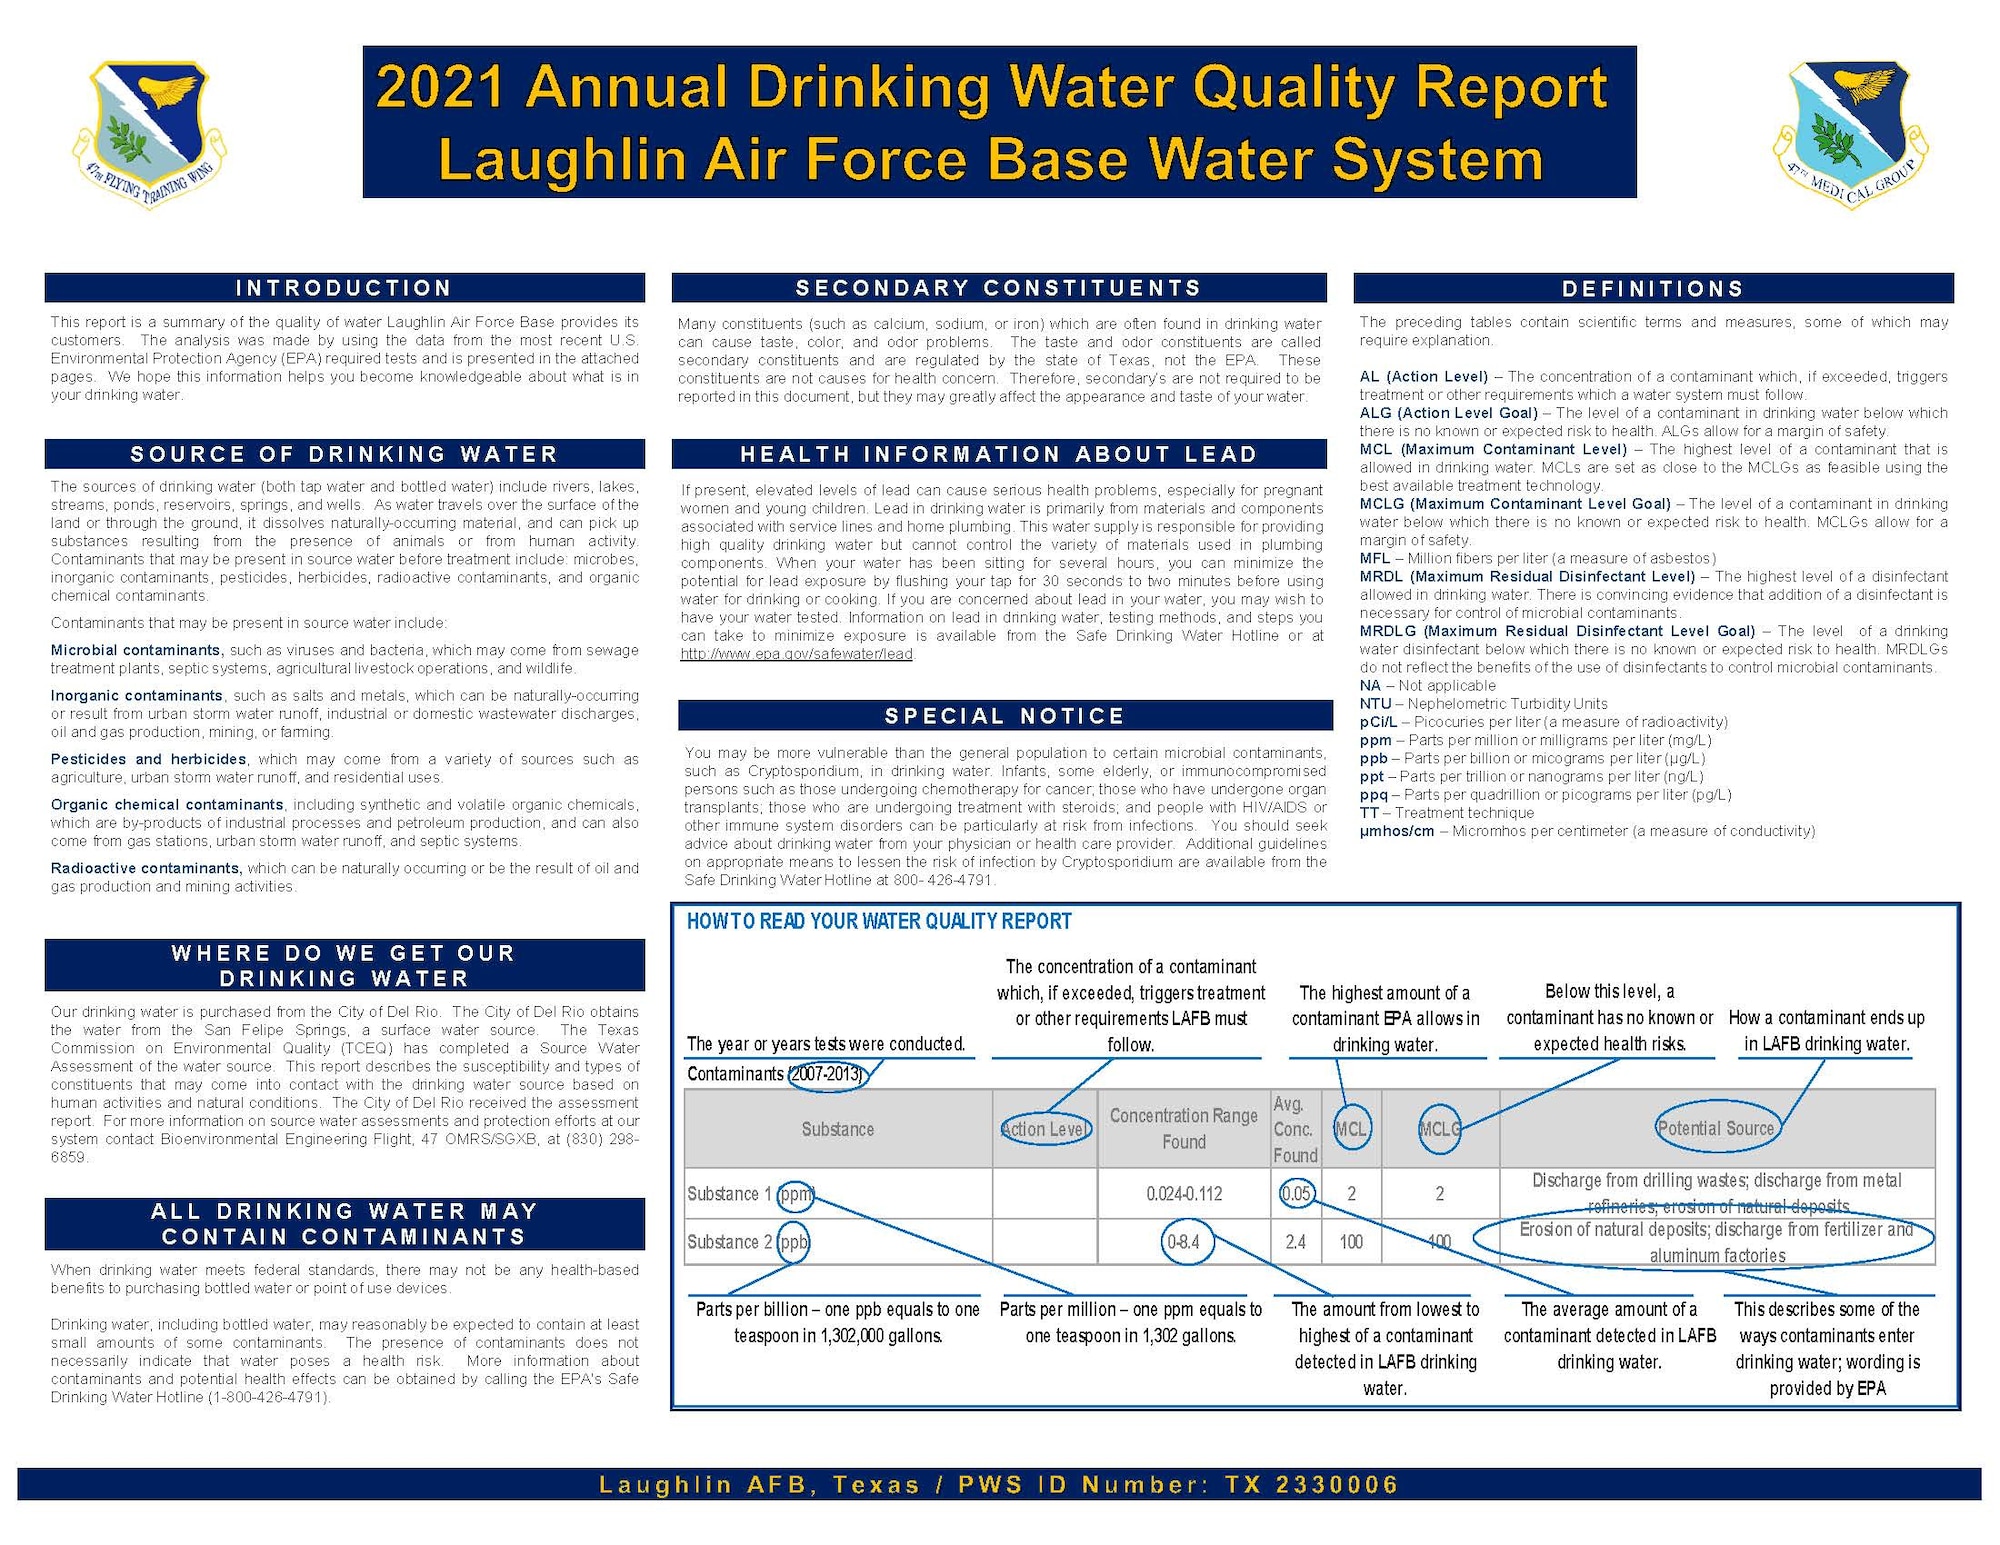 A report of the 2021 Annual Drinking Water Quality at Laughlin Air Force Base.